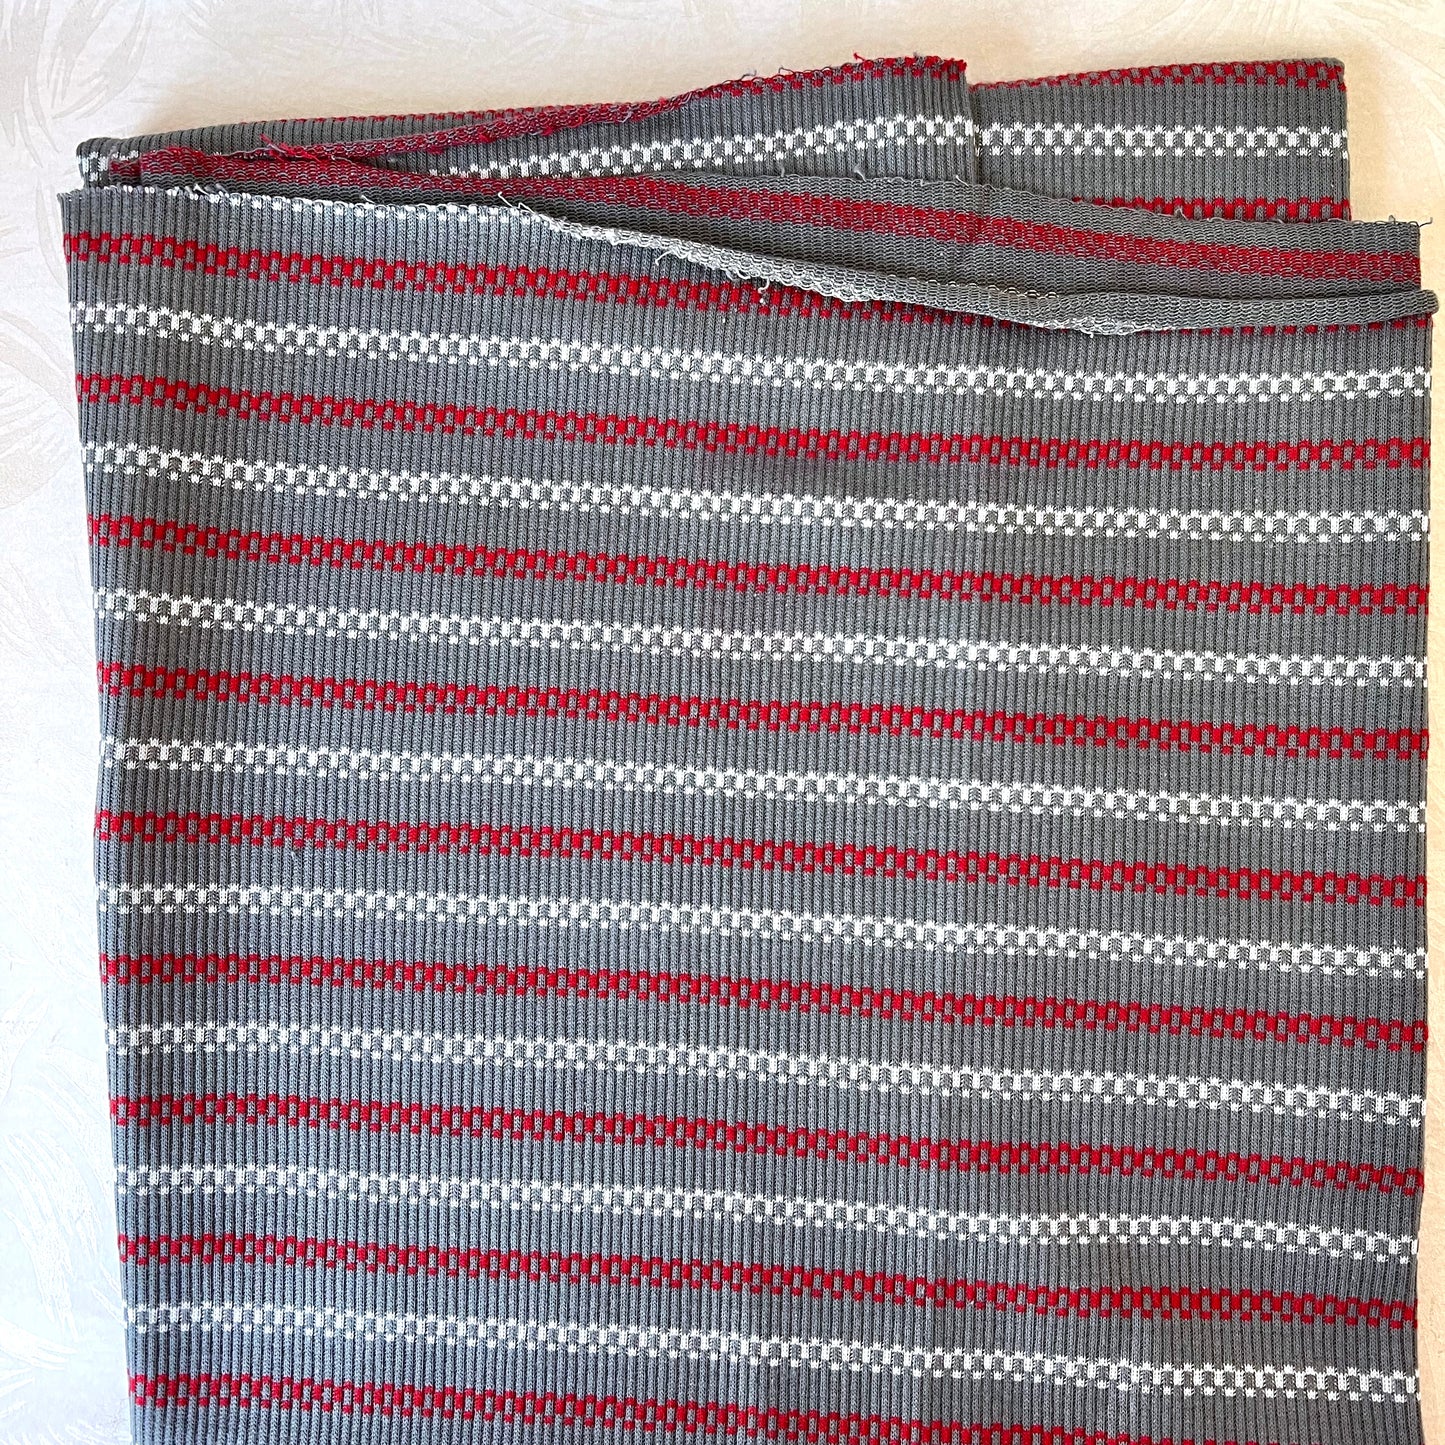 Striped Ribbed Double-Knit Fabric